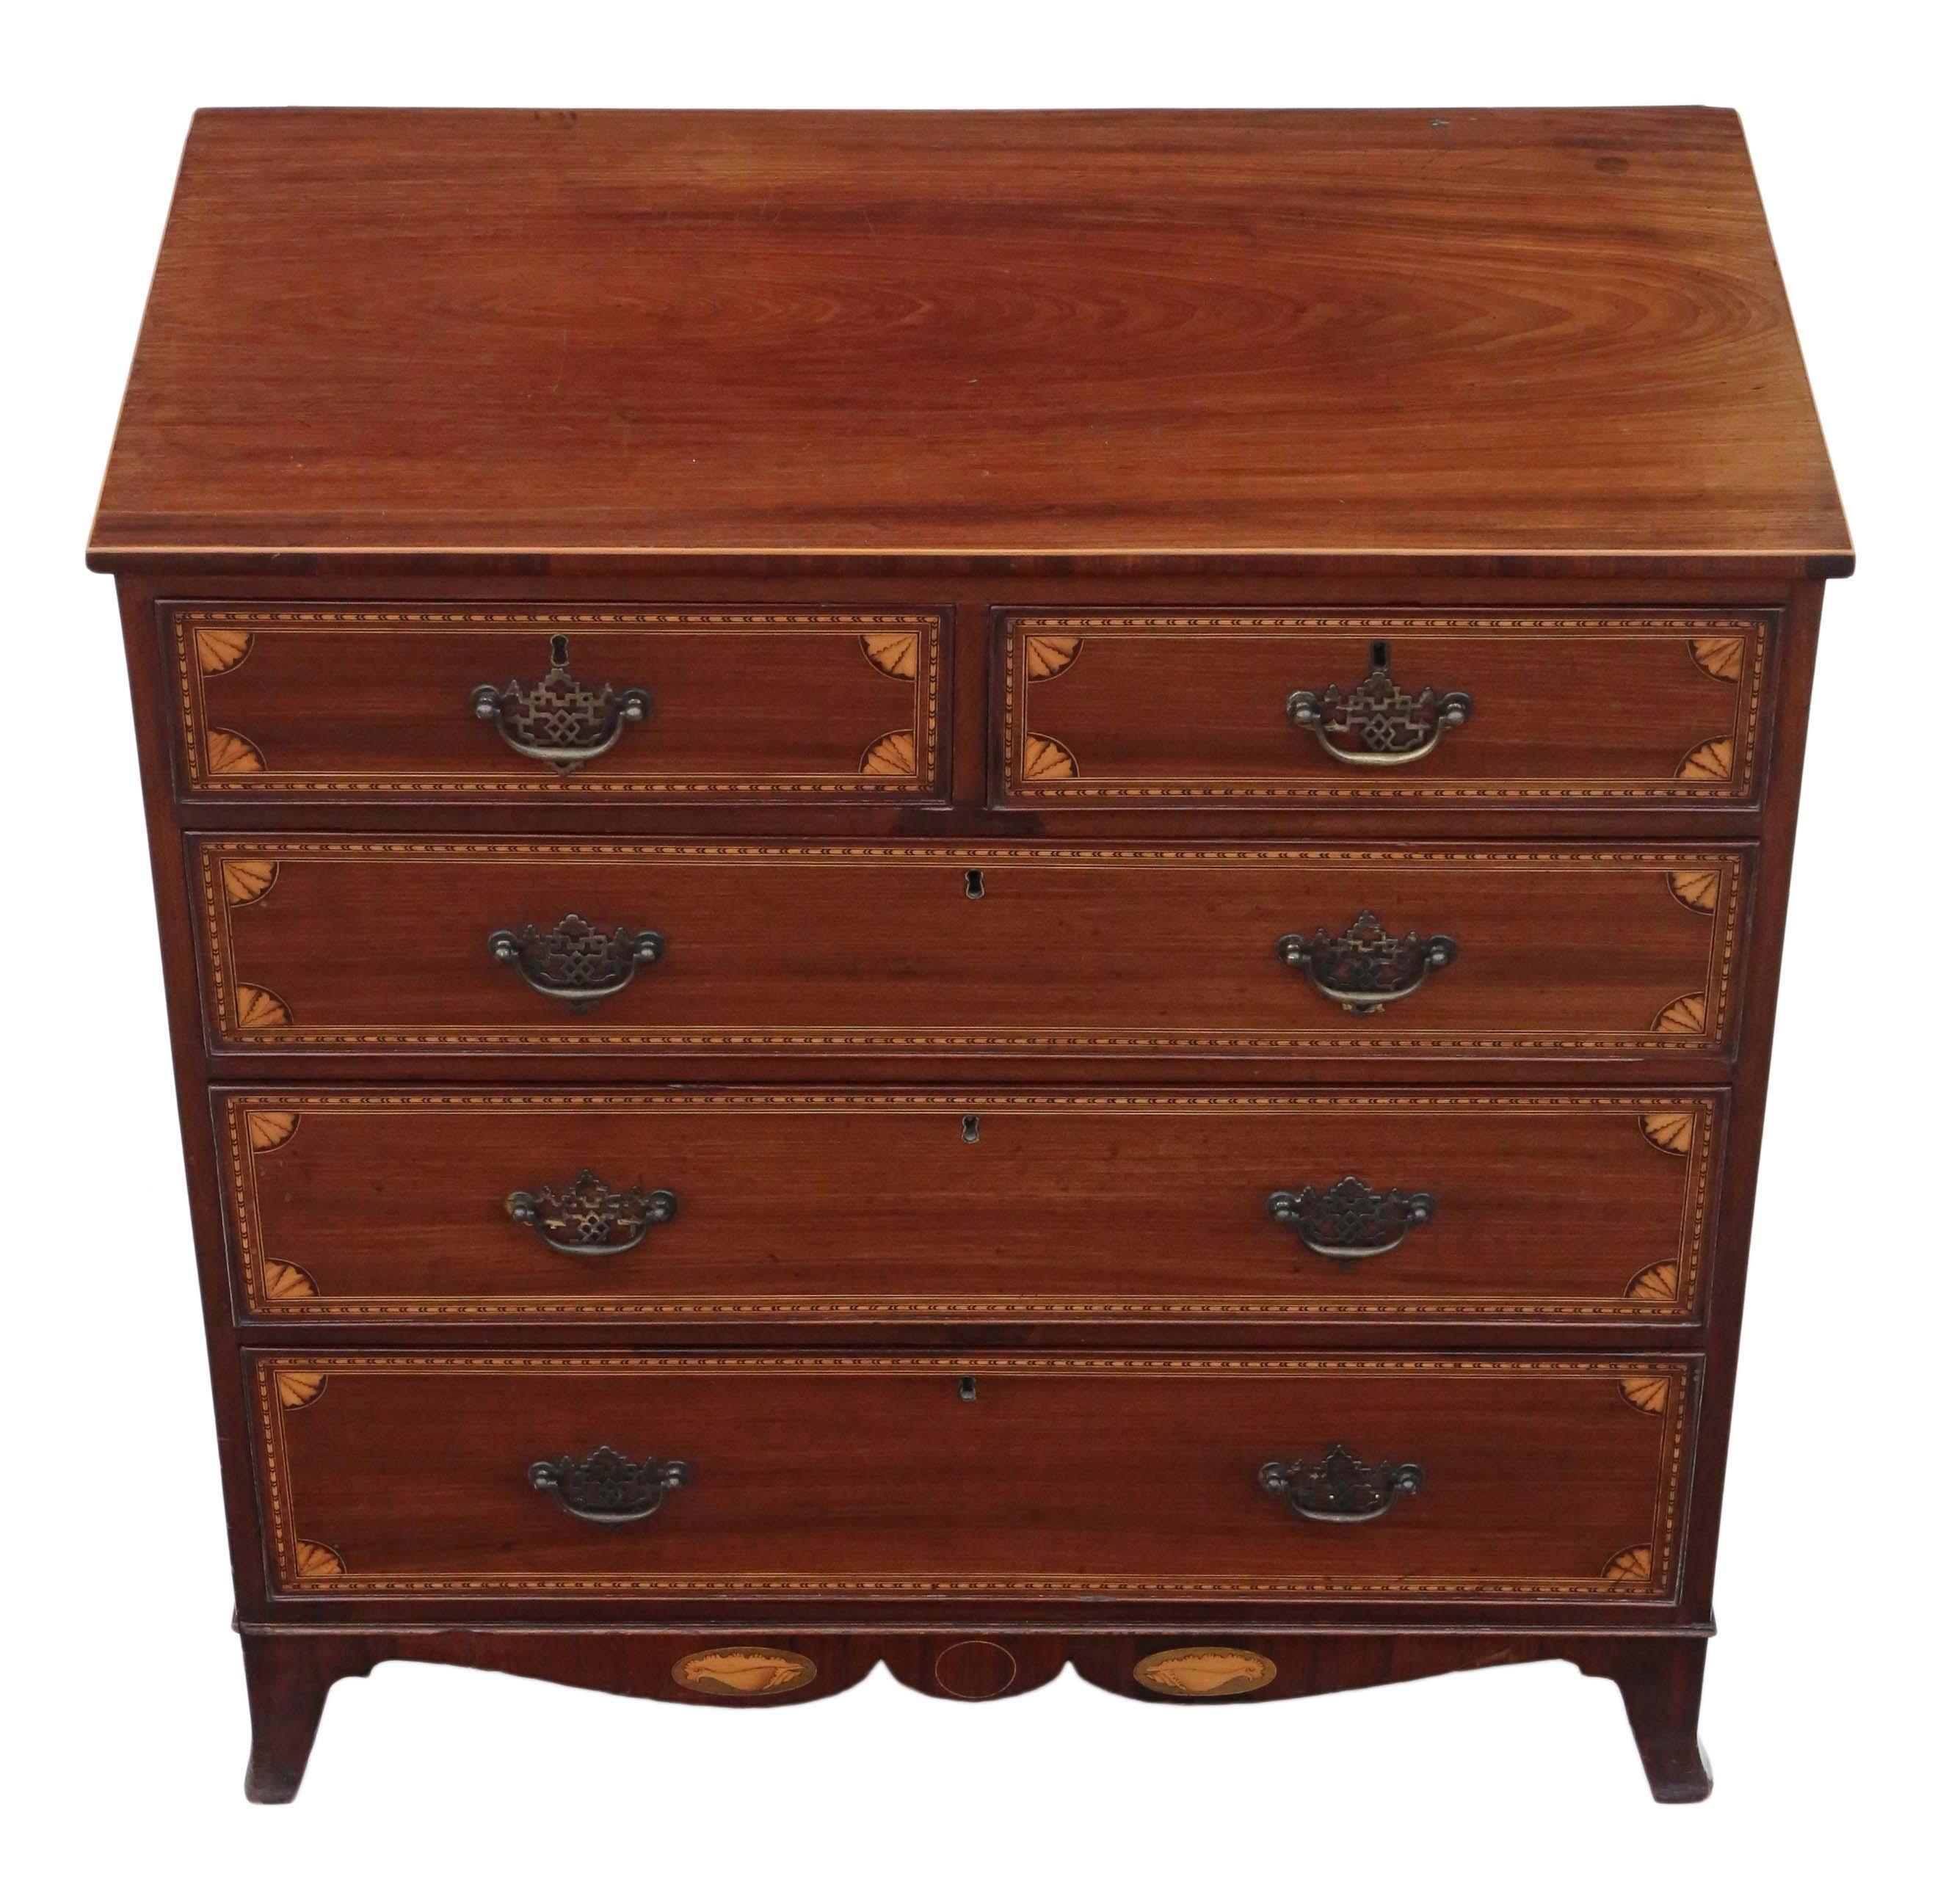 Georgian circa 1800 inlaid mahogany chest of drawers.
Solid and strong, with no loose joints and no woodworm. An absolutely charming rare find with beautiful inlay.
The oak lined drawers slide freely.
Overall maximum dimensions: 97cm wide, 52cm